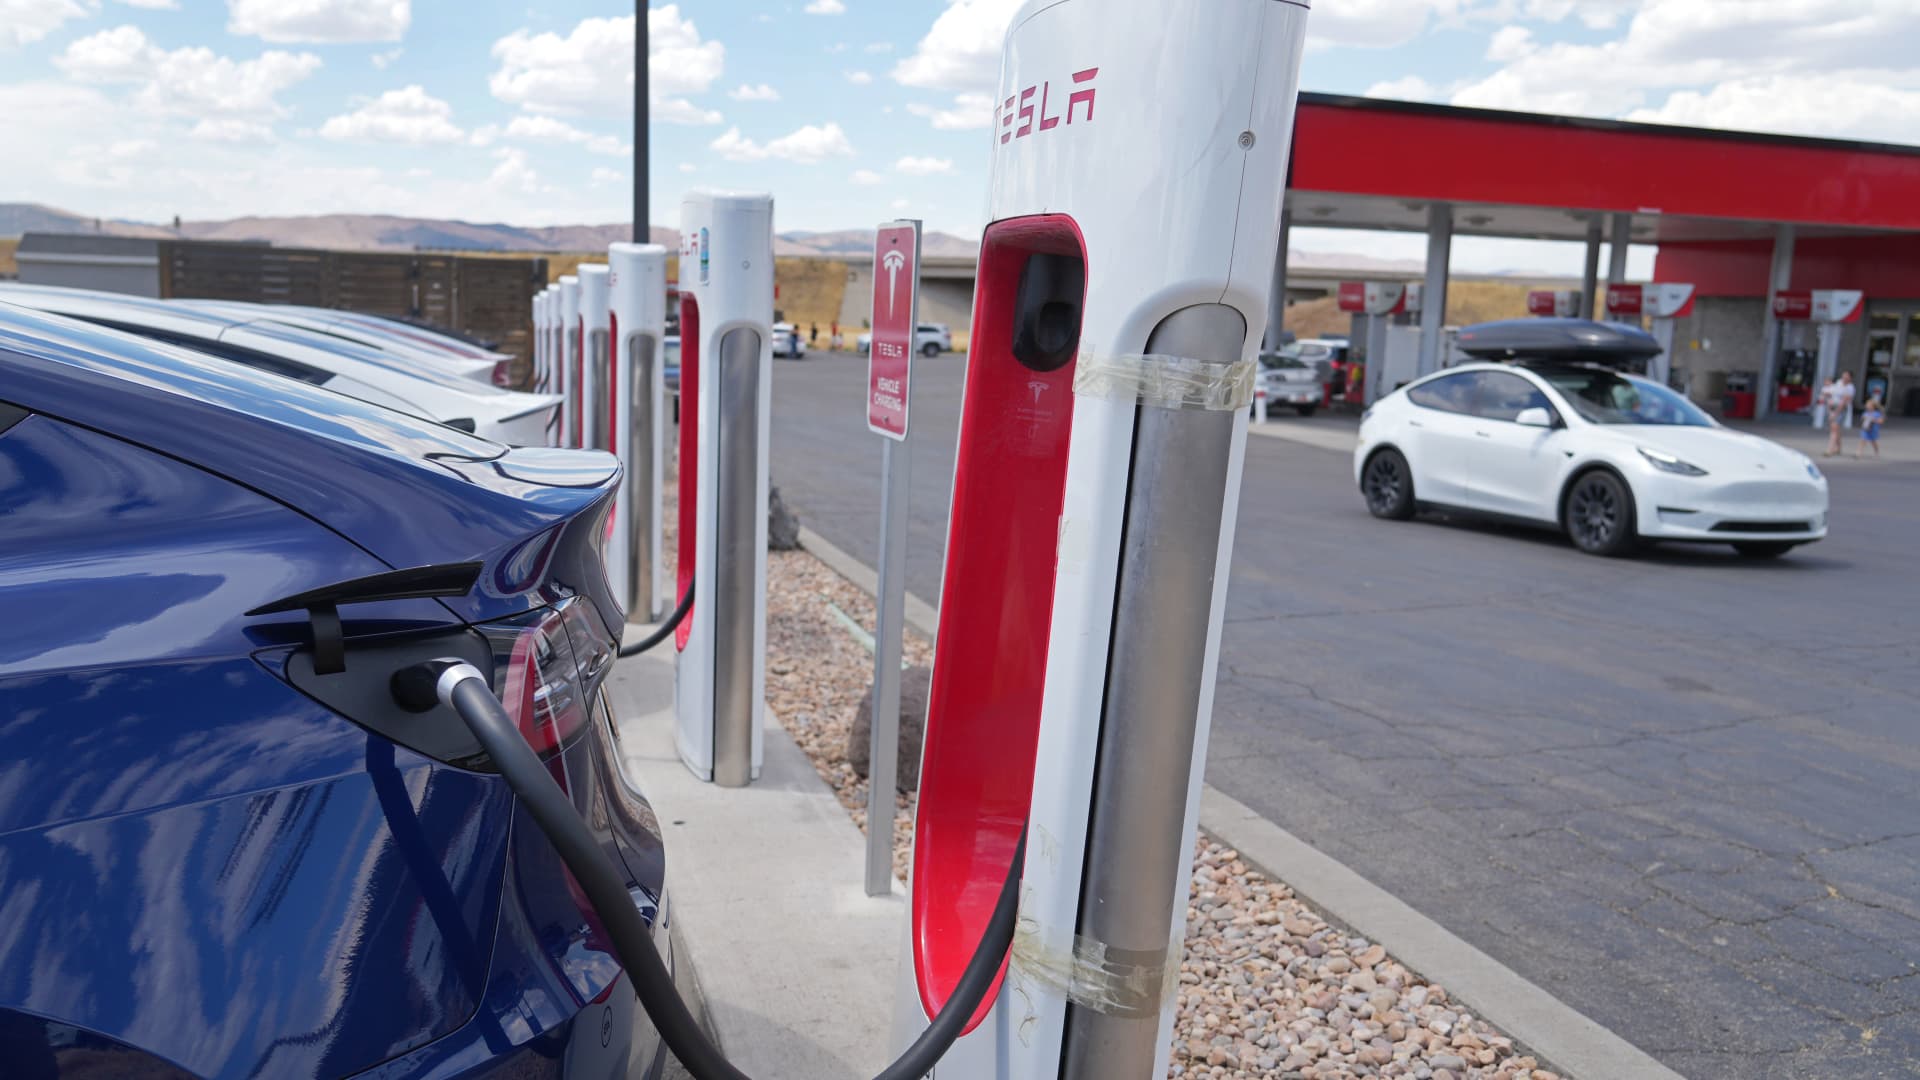 Tesla cars charge next to a traditional Texaco gas station on July 17, 2022 in Nephi, Utah. With more electric cars on the road, lack of charging infrastructure is becoming more of a problem for EV owners.